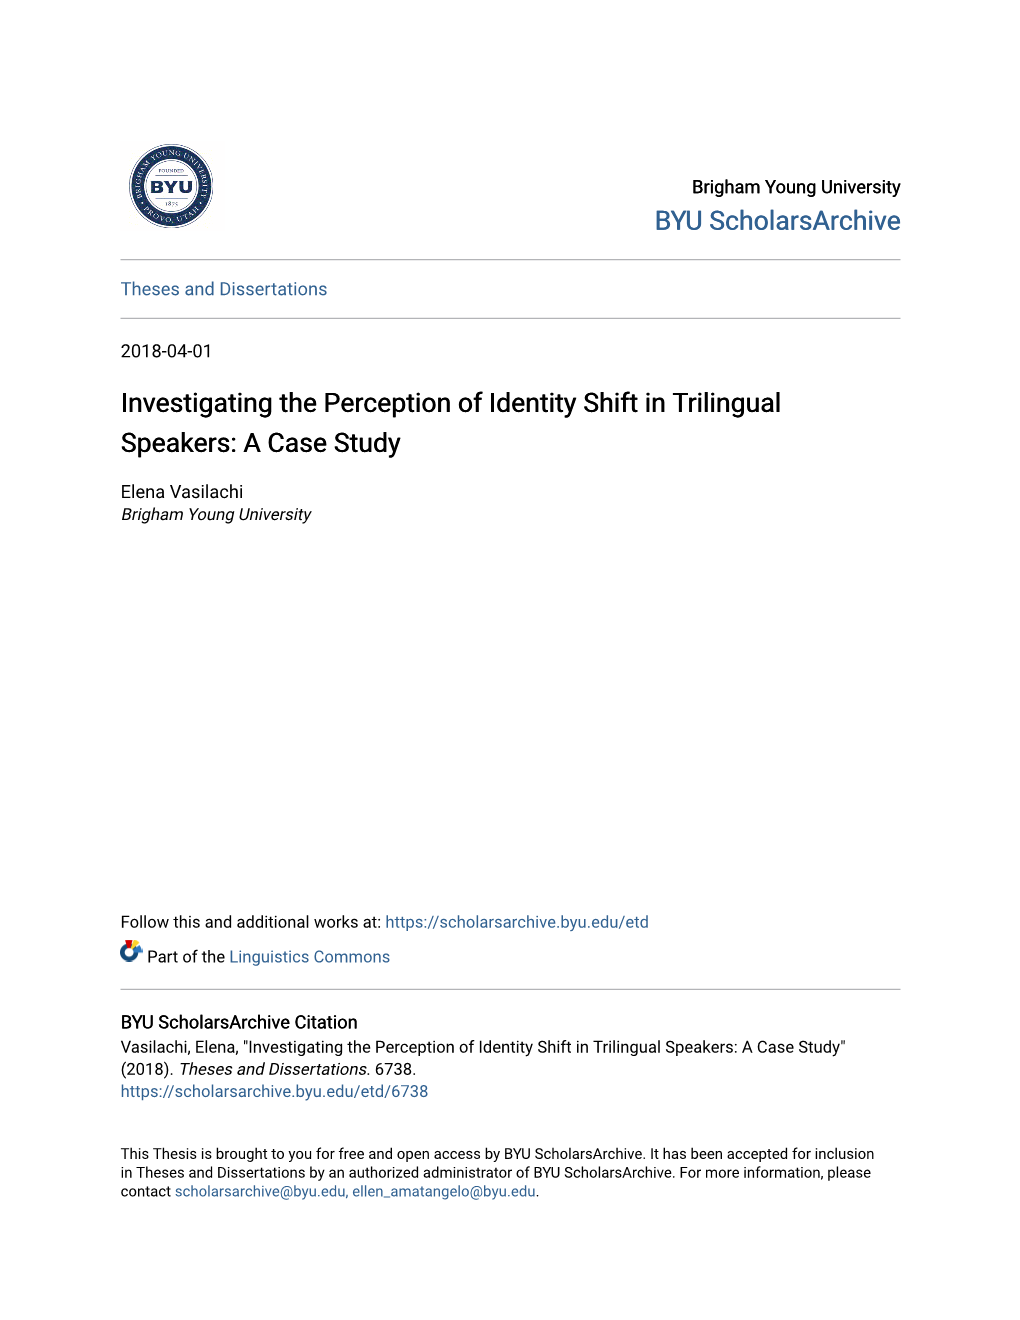 Investigating the Perception of Identity Shift in Trilingual Speakers: a Case Study